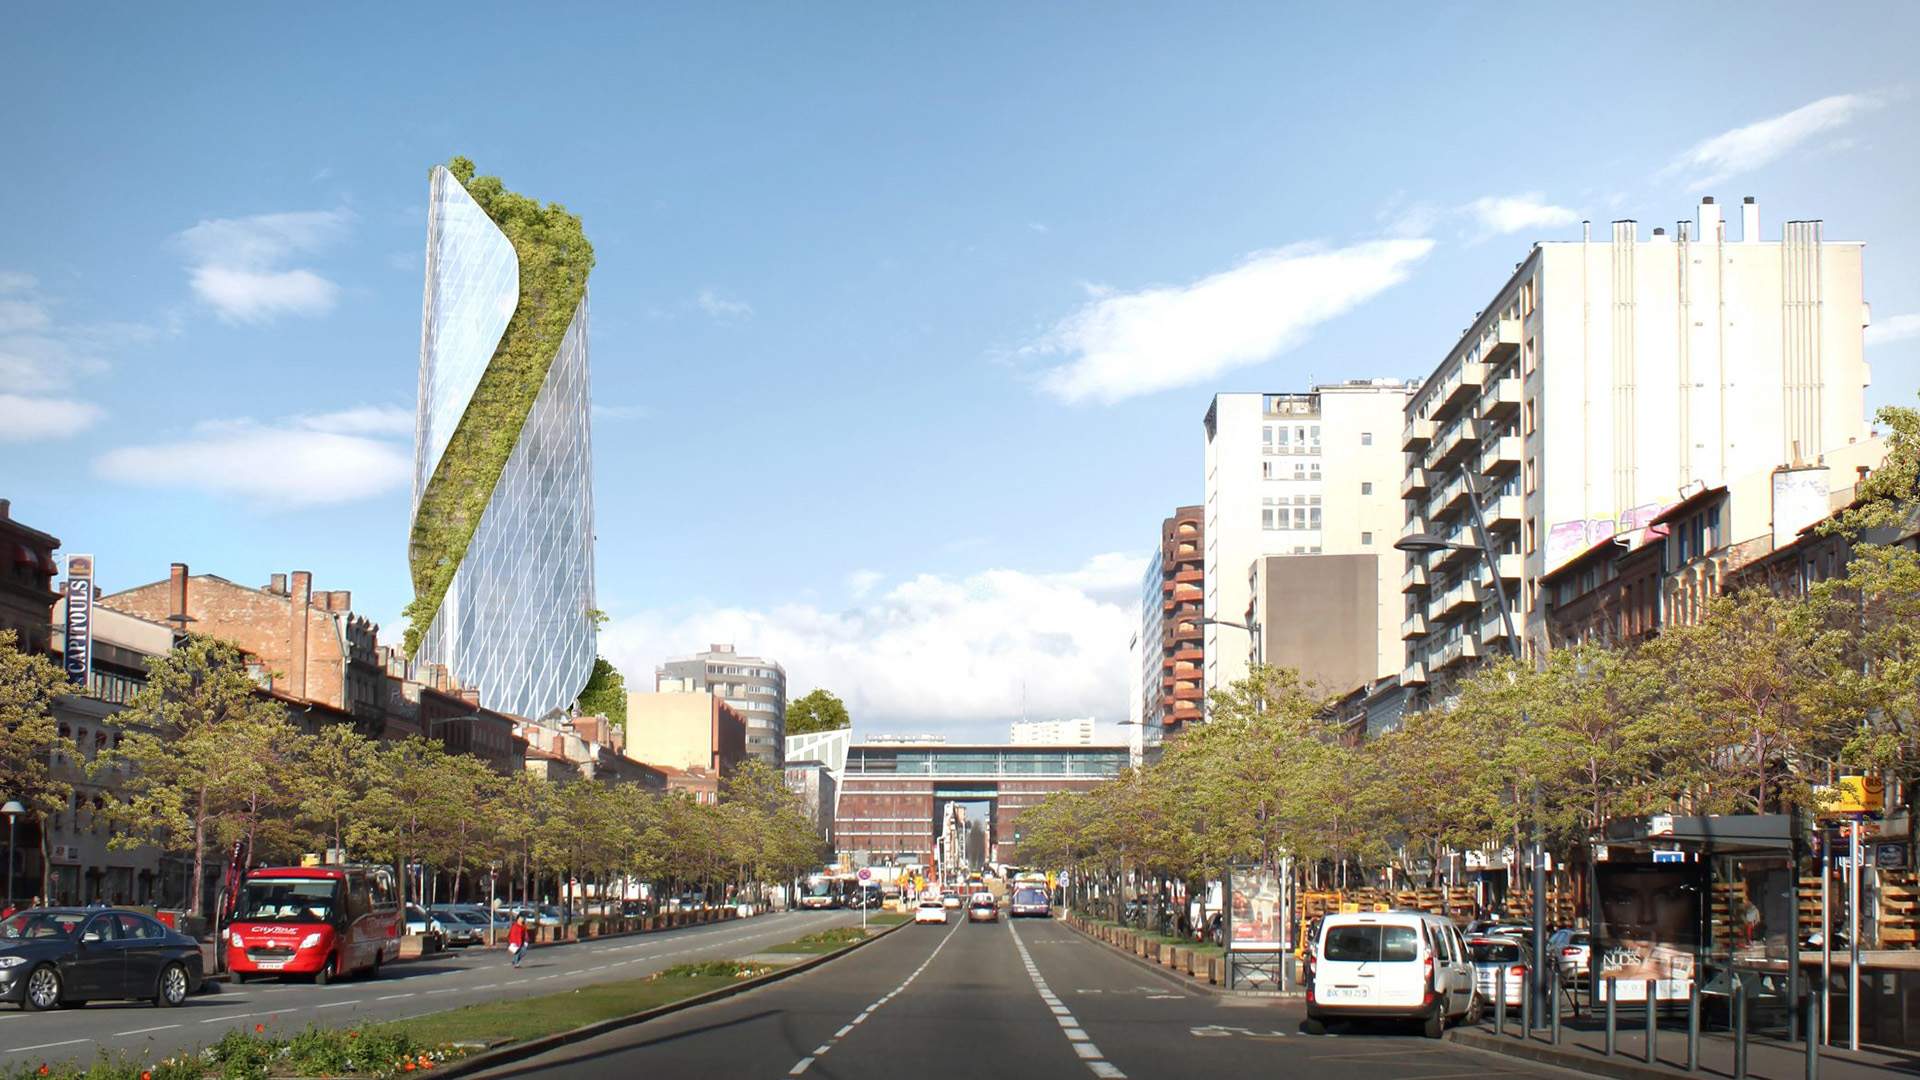 France's New Spiral Skyscraper Takes the Vertical Garden Trend to Great Heights